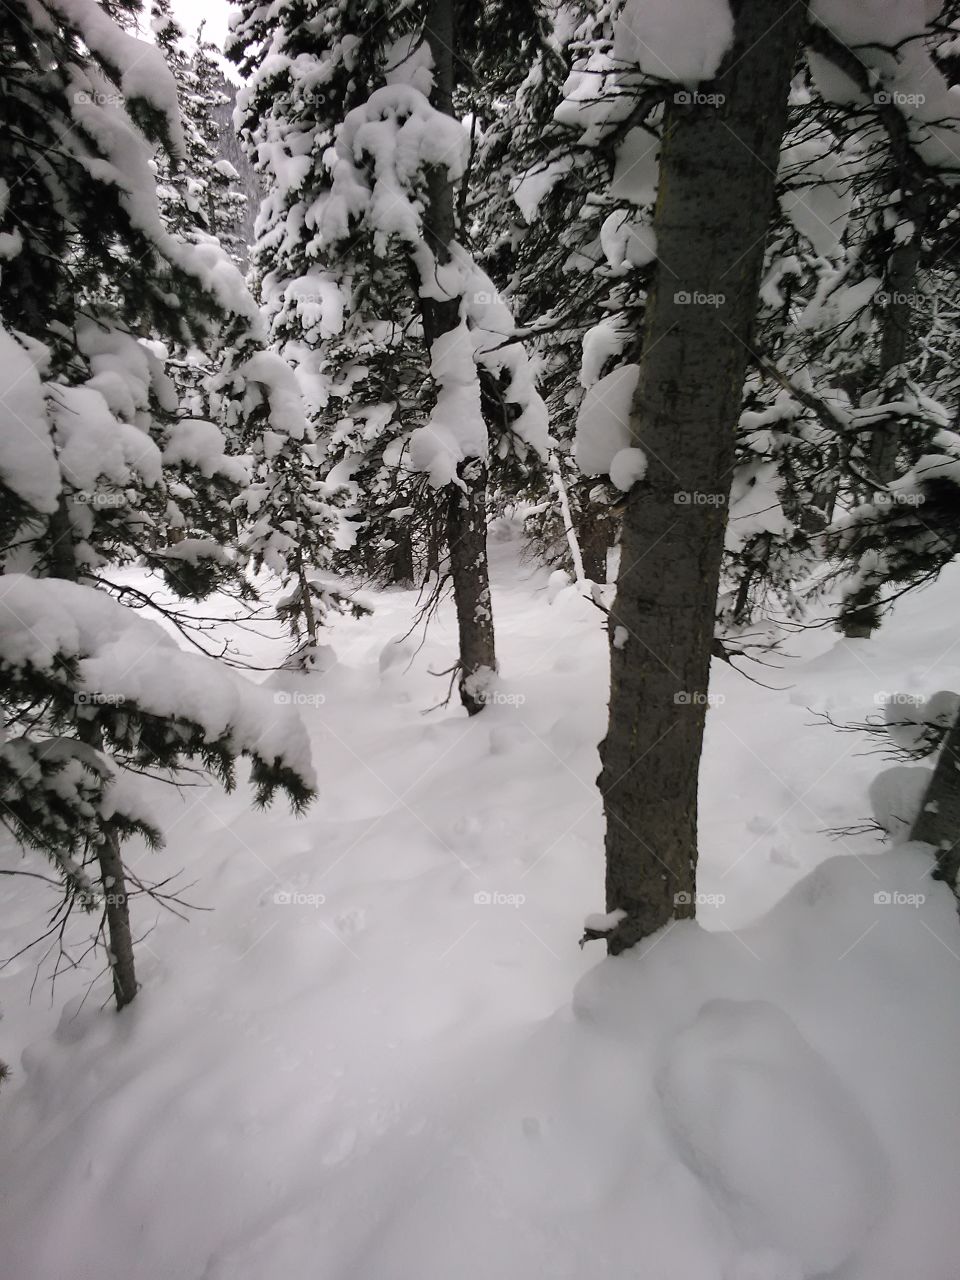 Tree Pow. Just a spot I stopped at while shredding some pow in the tree's on some Colorado mountain.